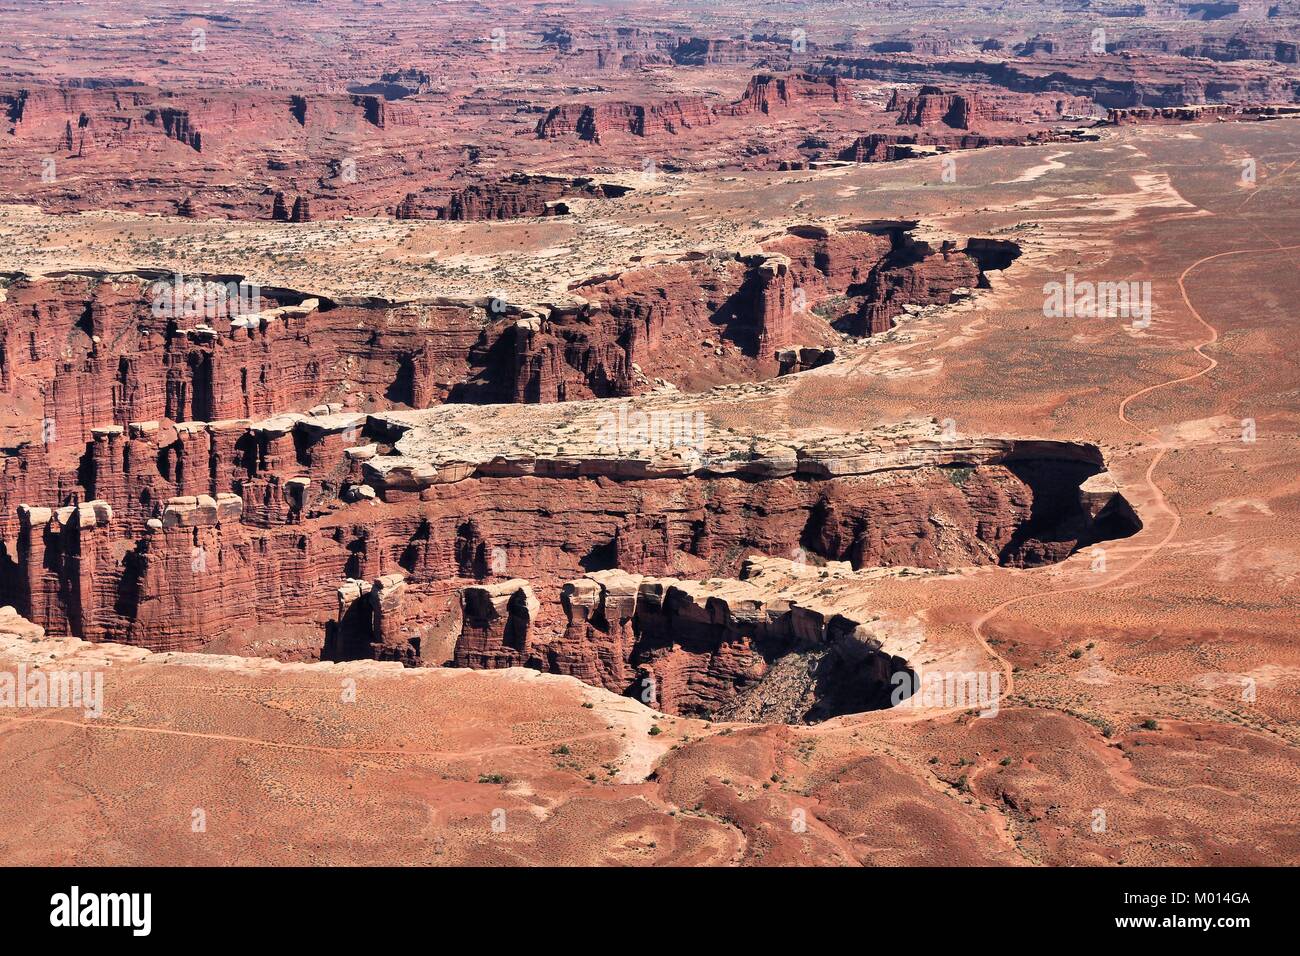 Canyonlands National Park in Utah, USA. Island in the Sky district. Stock Photo